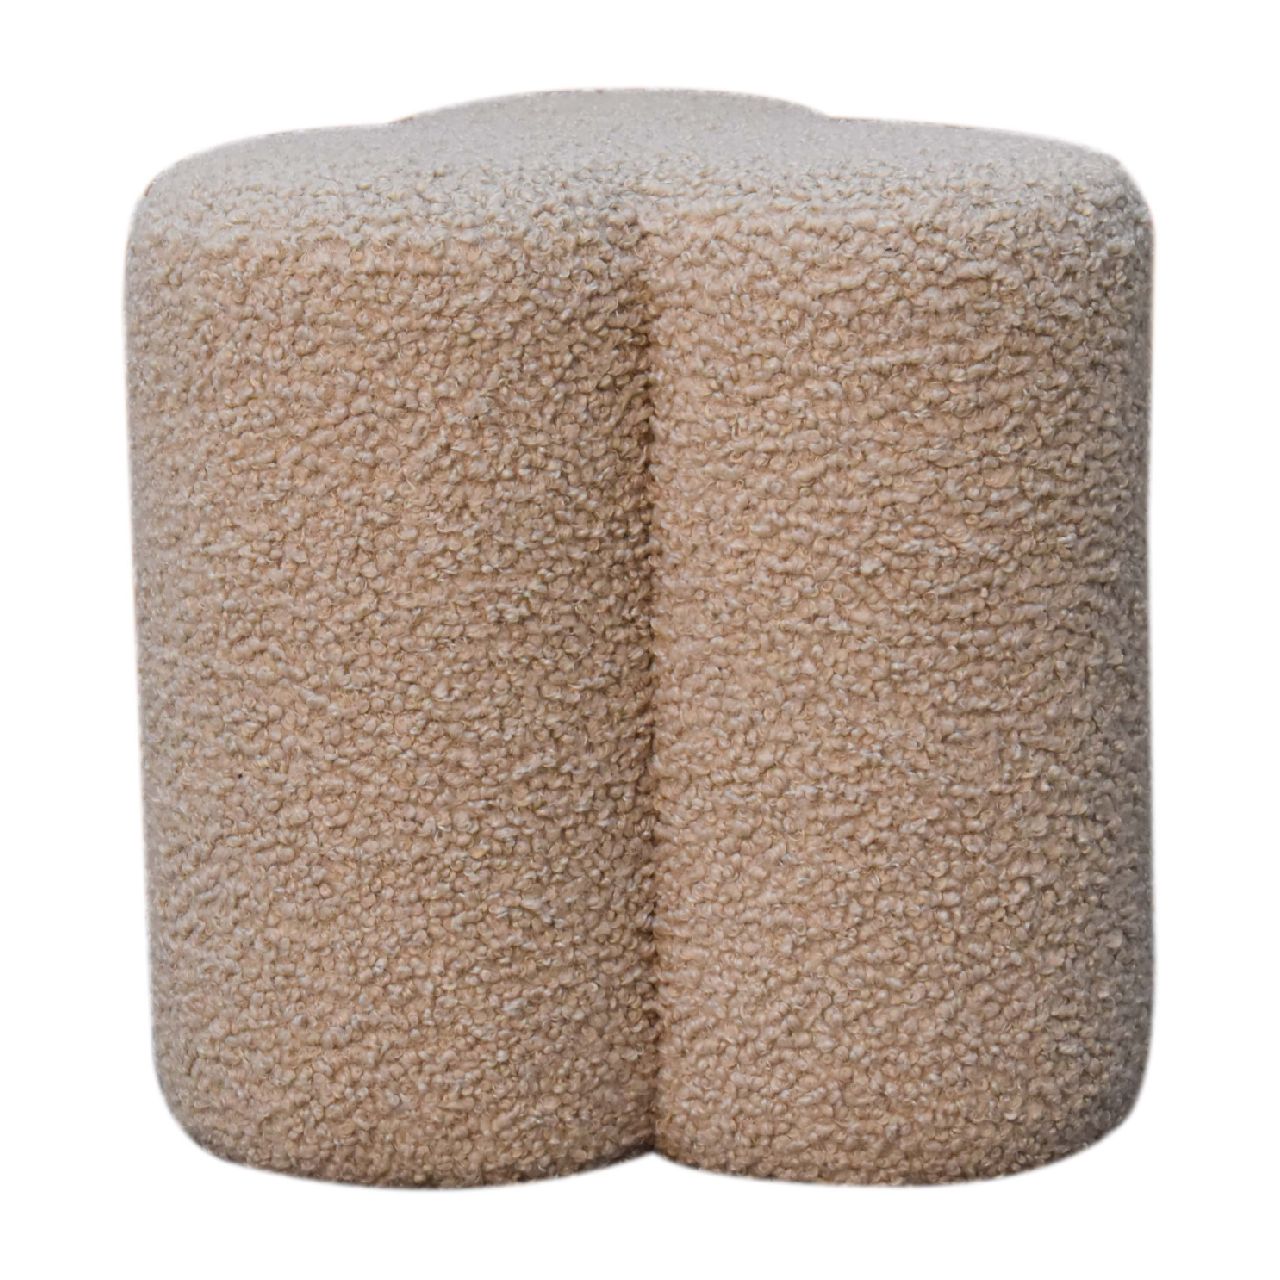 View Mud Boucle Clover Footstool information